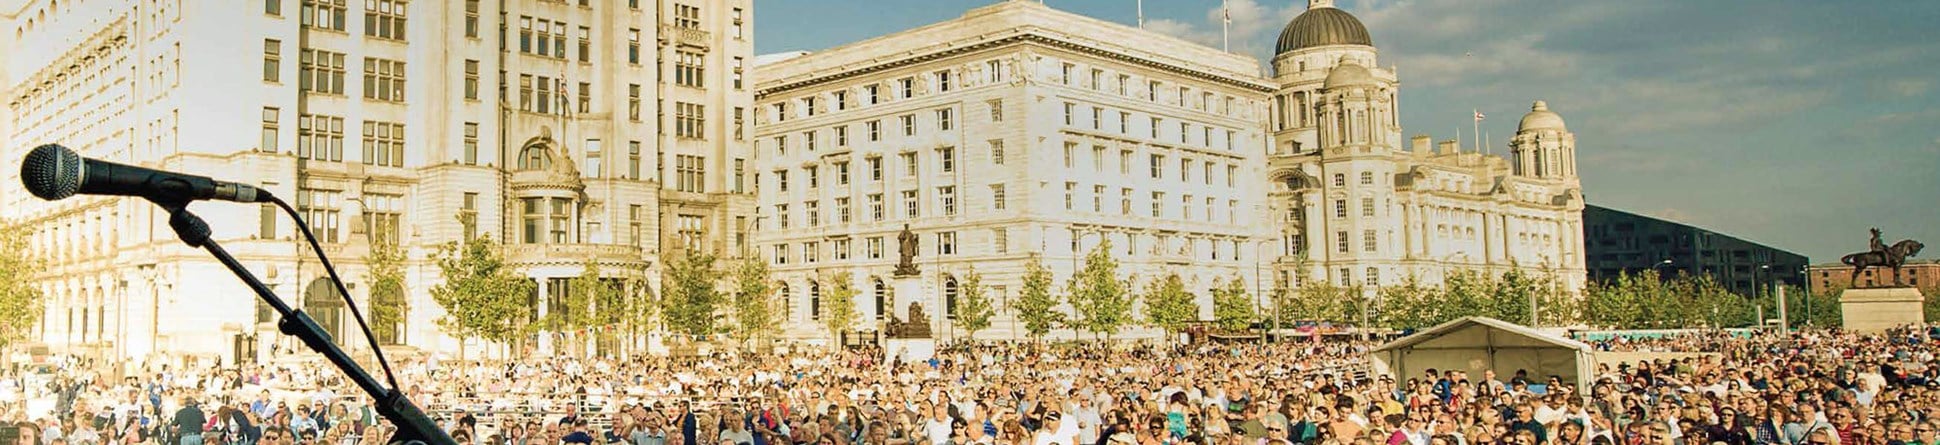 People attending open air concert in front the the Liver Building